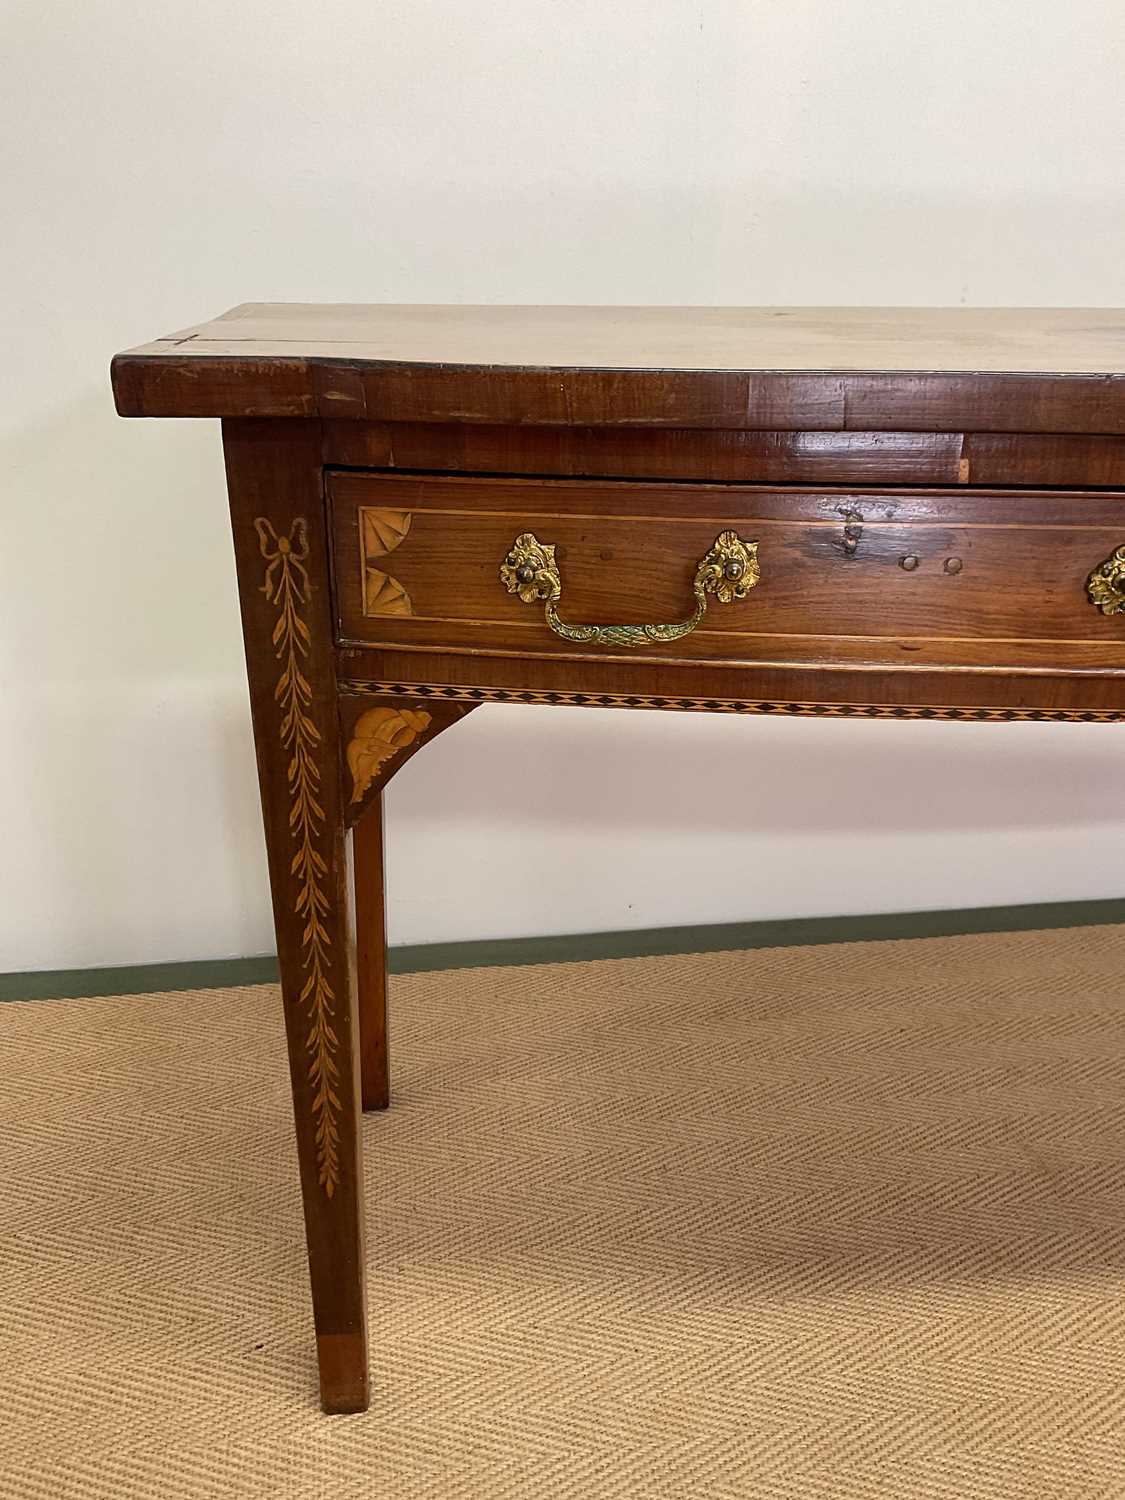 An early 19th century mahogany and inlaid bowfronted serving table with two frieze drawers raised on - Image 4 of 6